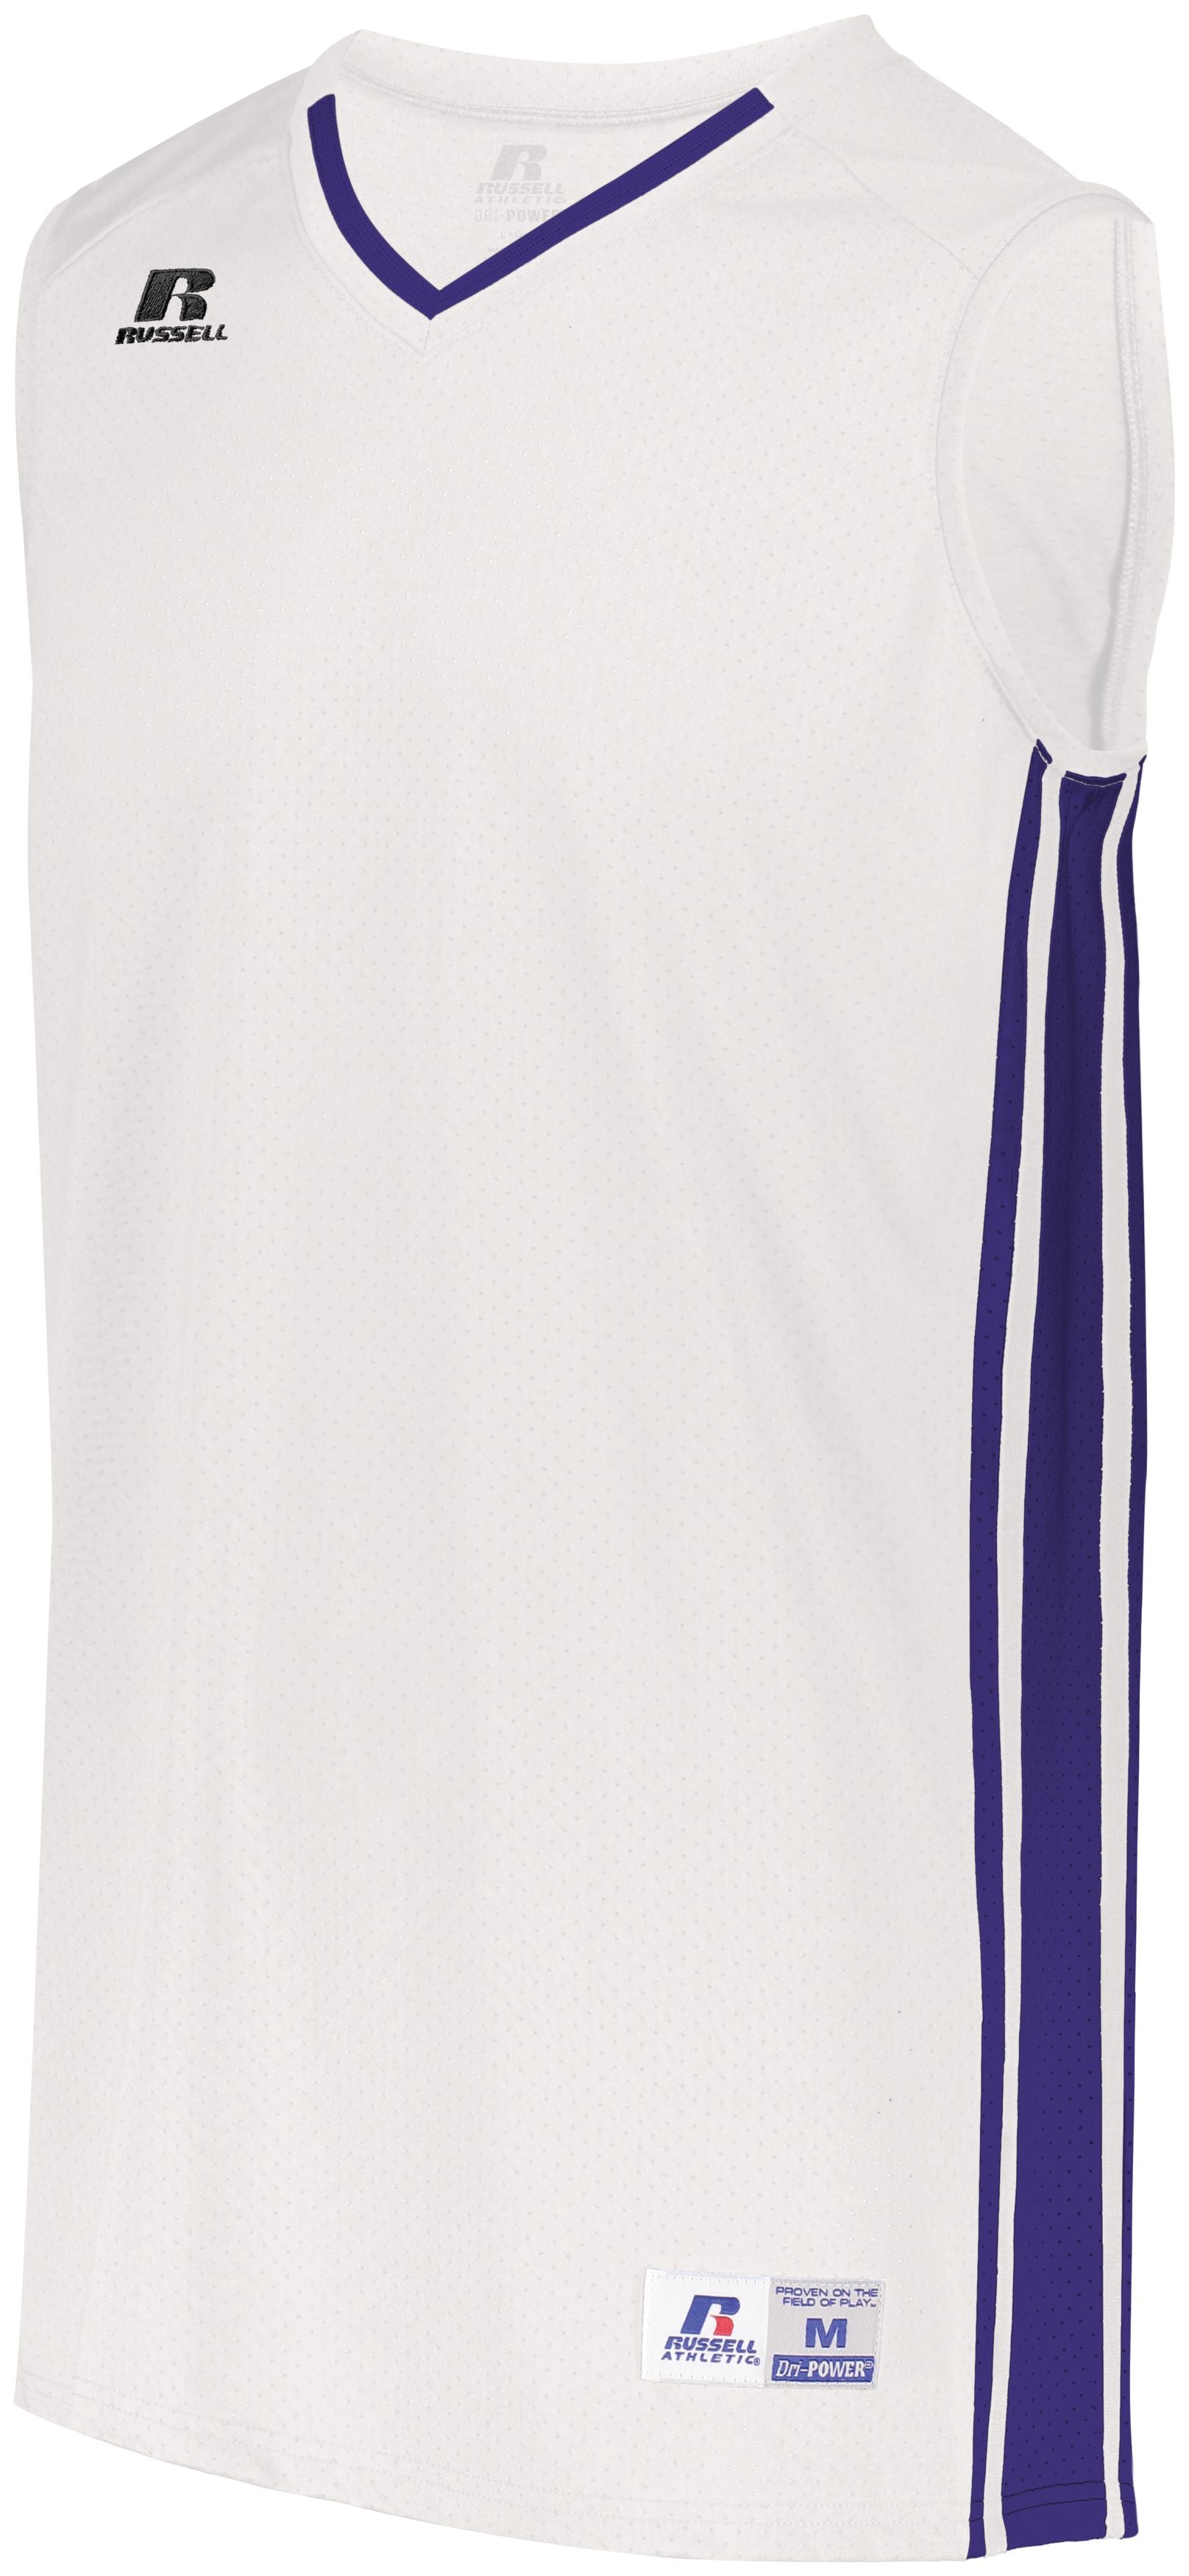 Russell Athletic Youth Legacy Basketball Jersey in White/Purple  -Part of the Youth, Youth-Jersey, Basketball, Russell-Athletic-Products, Shirts, All-Sports, All-Sports-1 product lines at KanaleyCreations.com